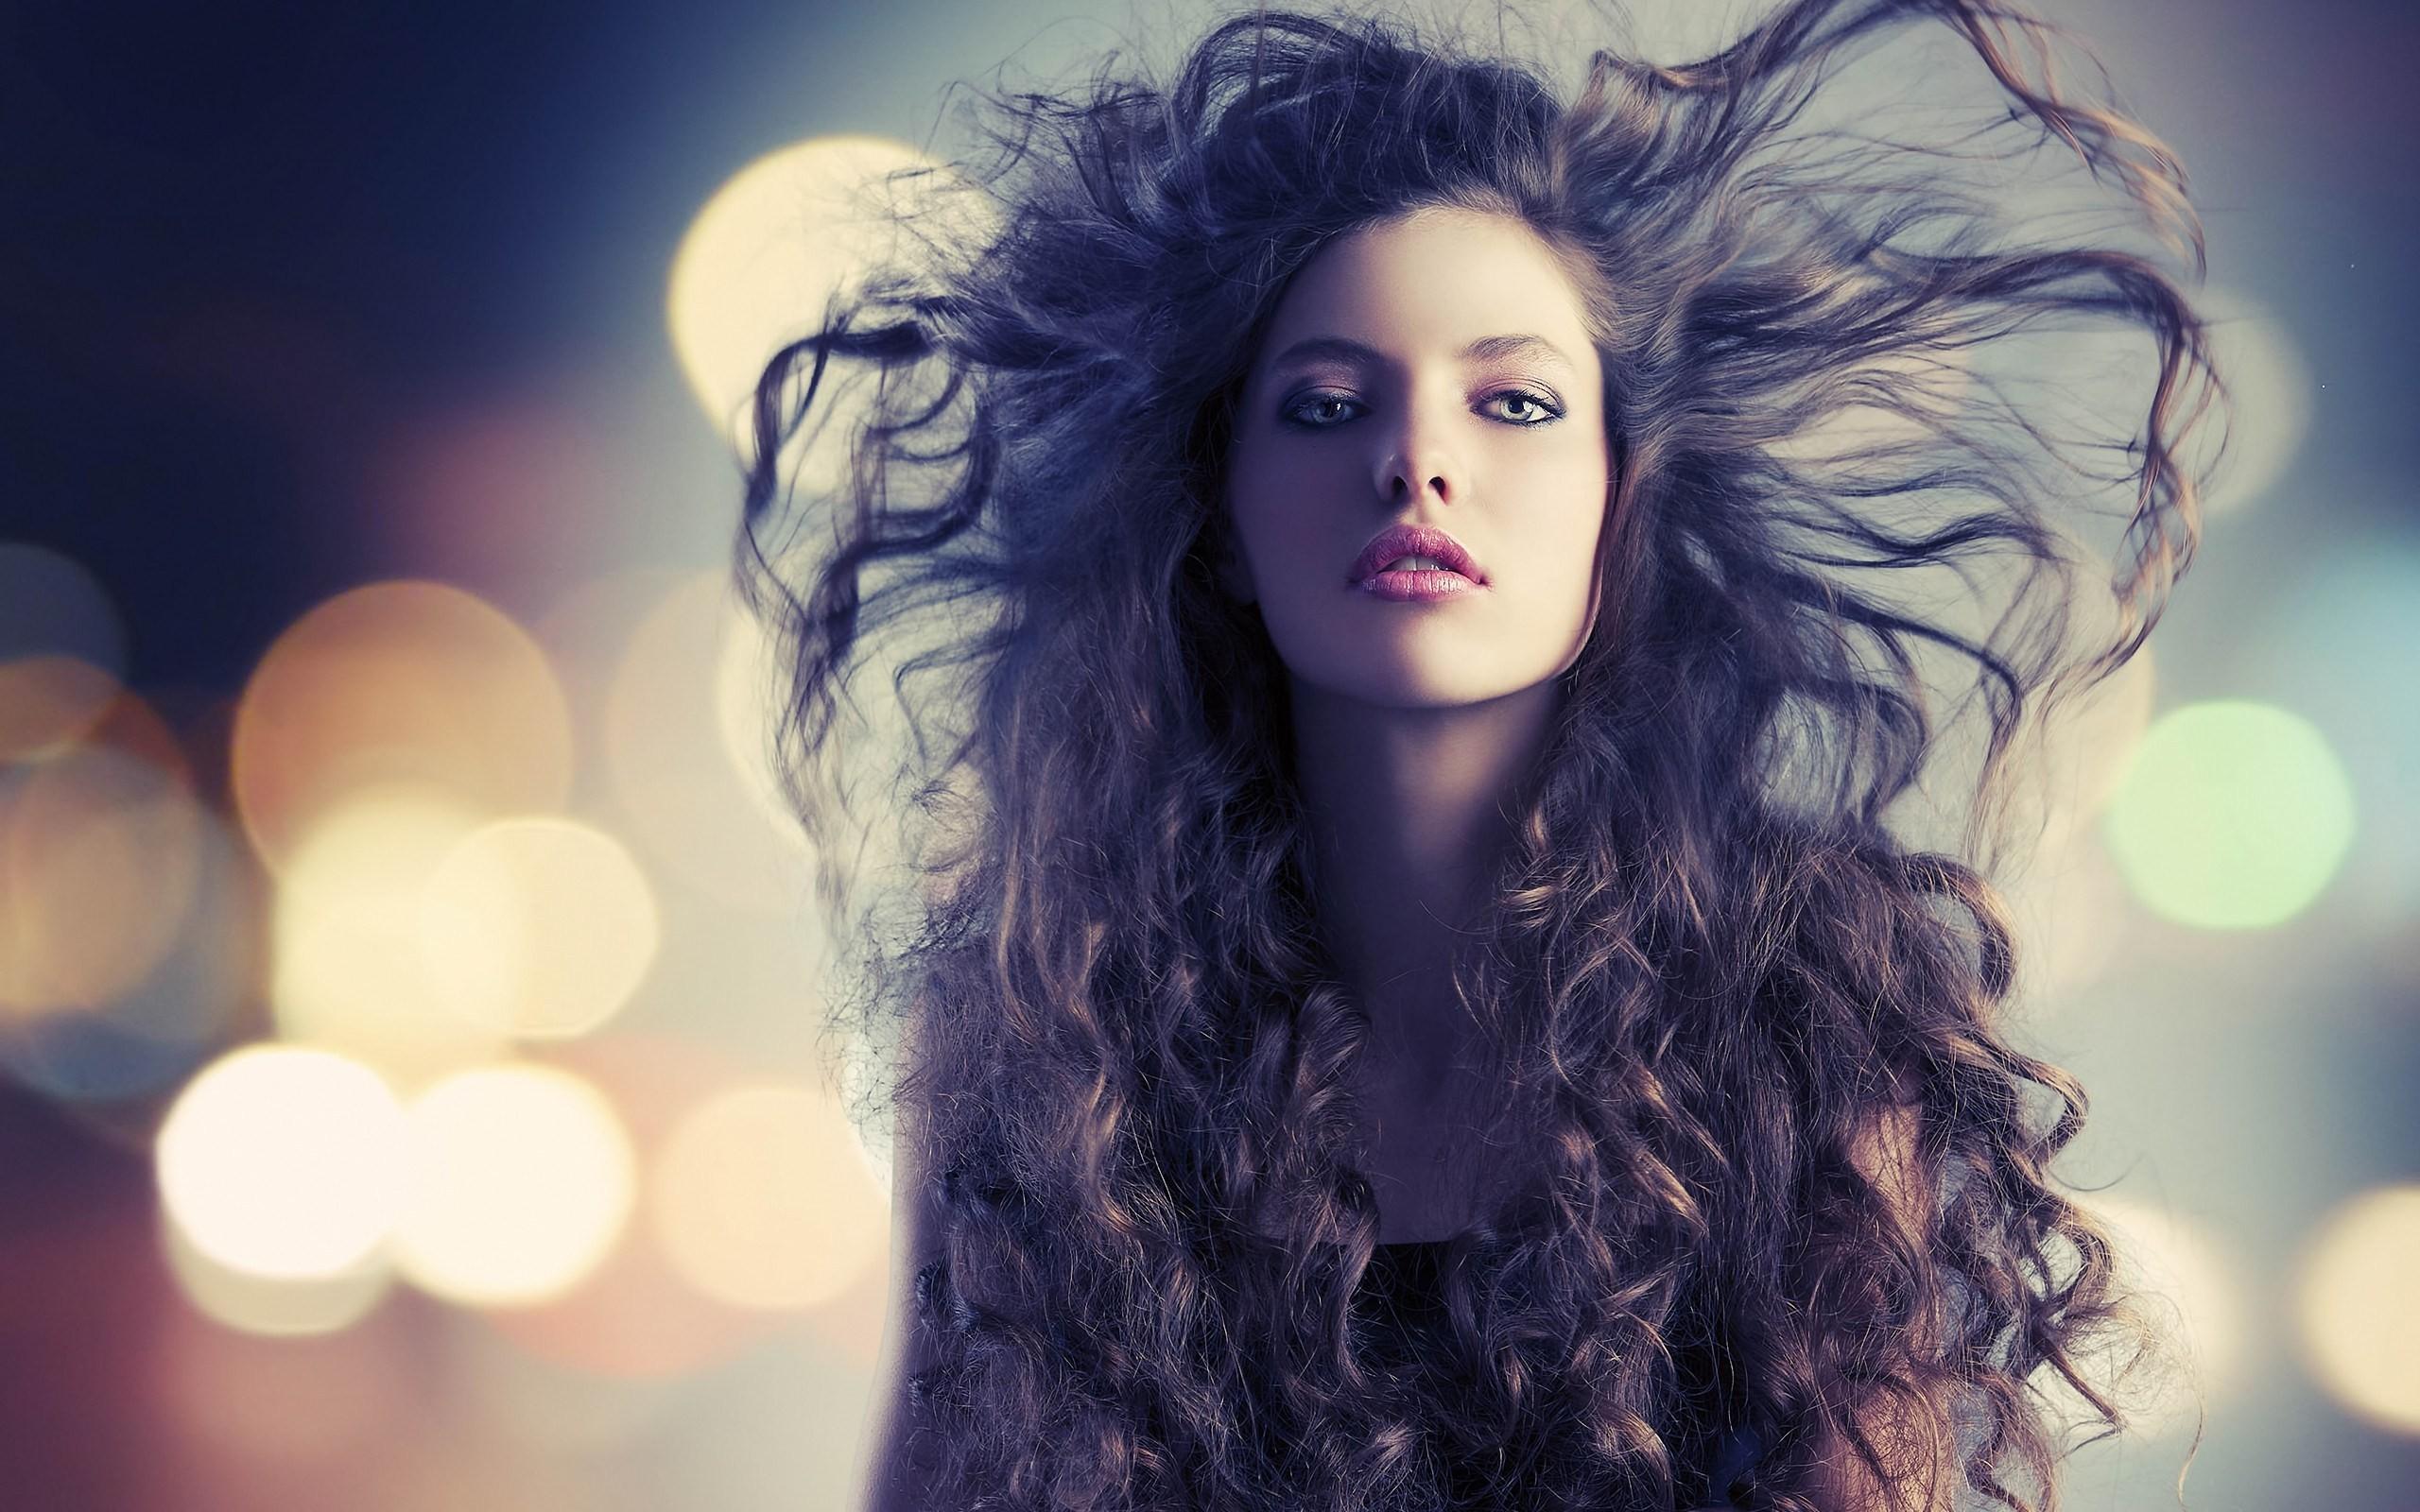 Women Hairstyle Wallpapers - Wallpaper Cave